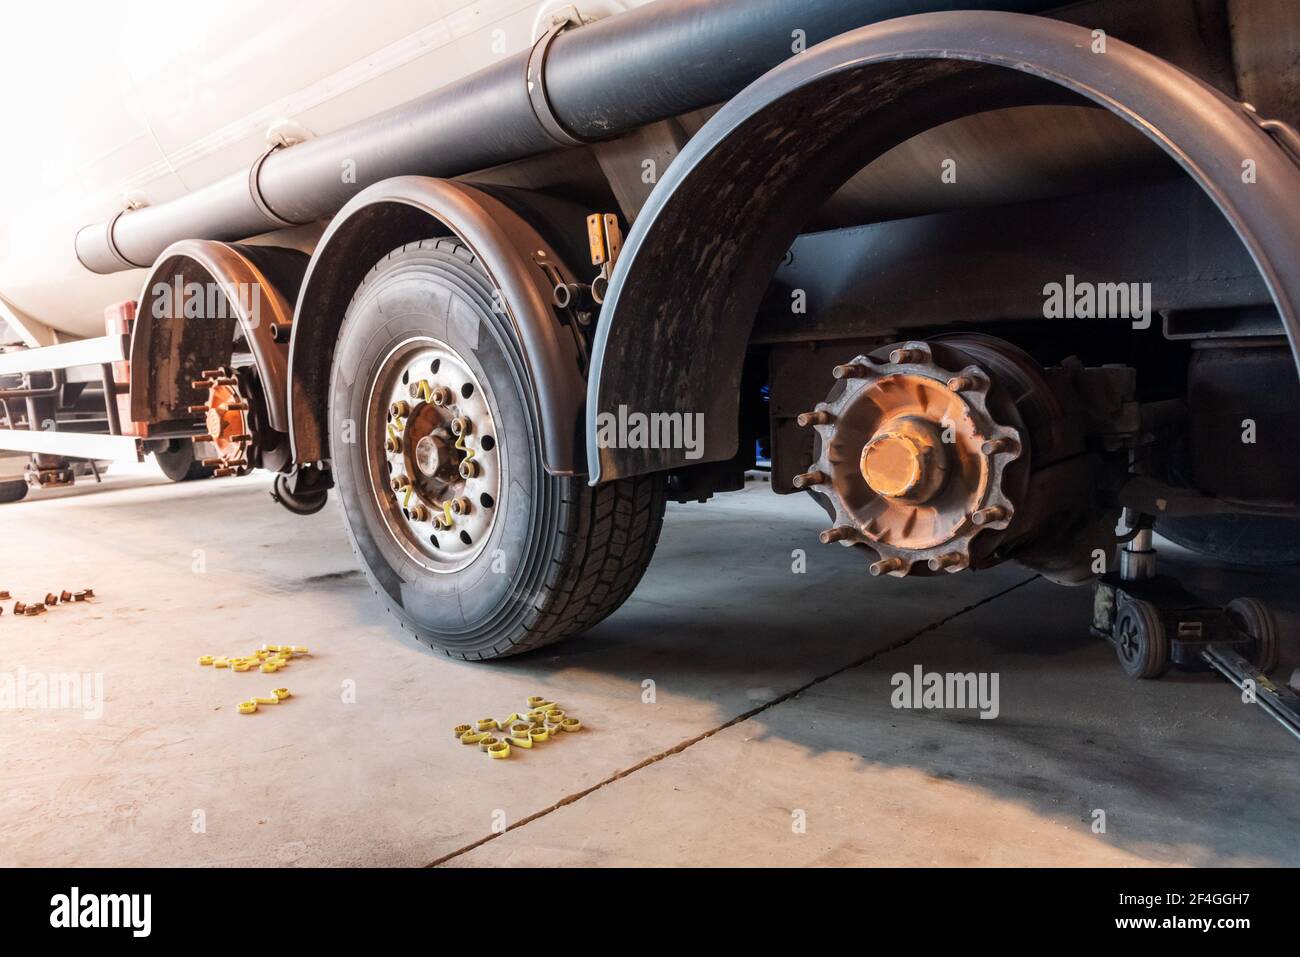 Truck in a tire shop changing wheels. Stock Photo